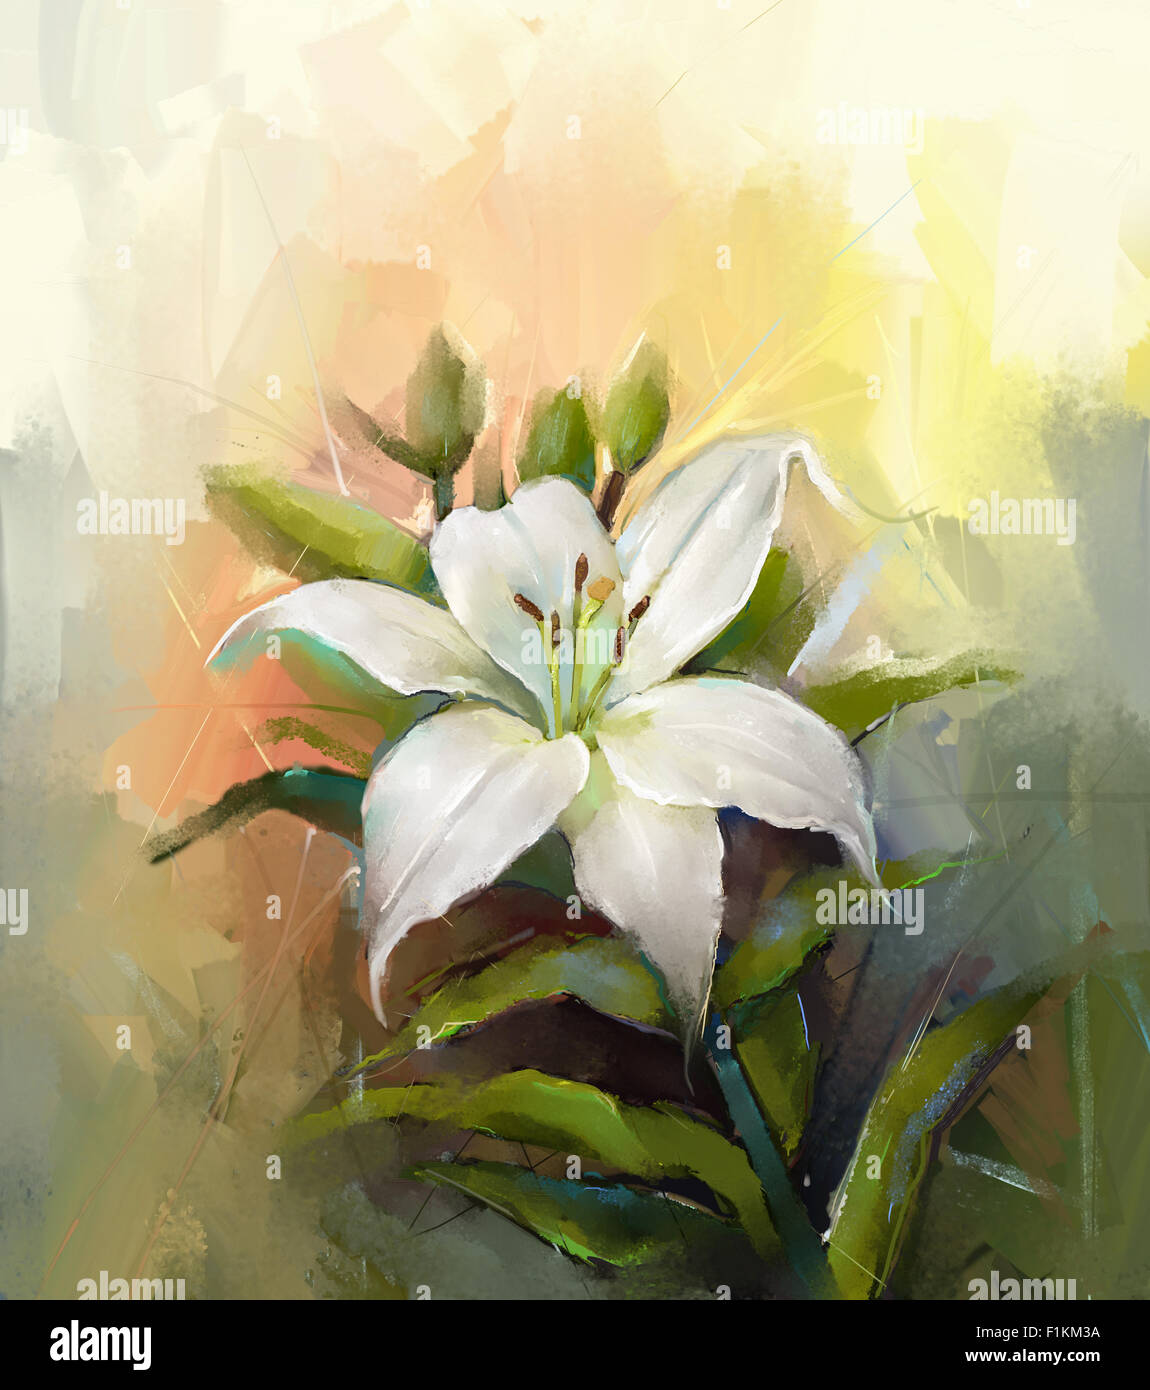 Oil painting still life of White lily flower with green leaf Stock ...